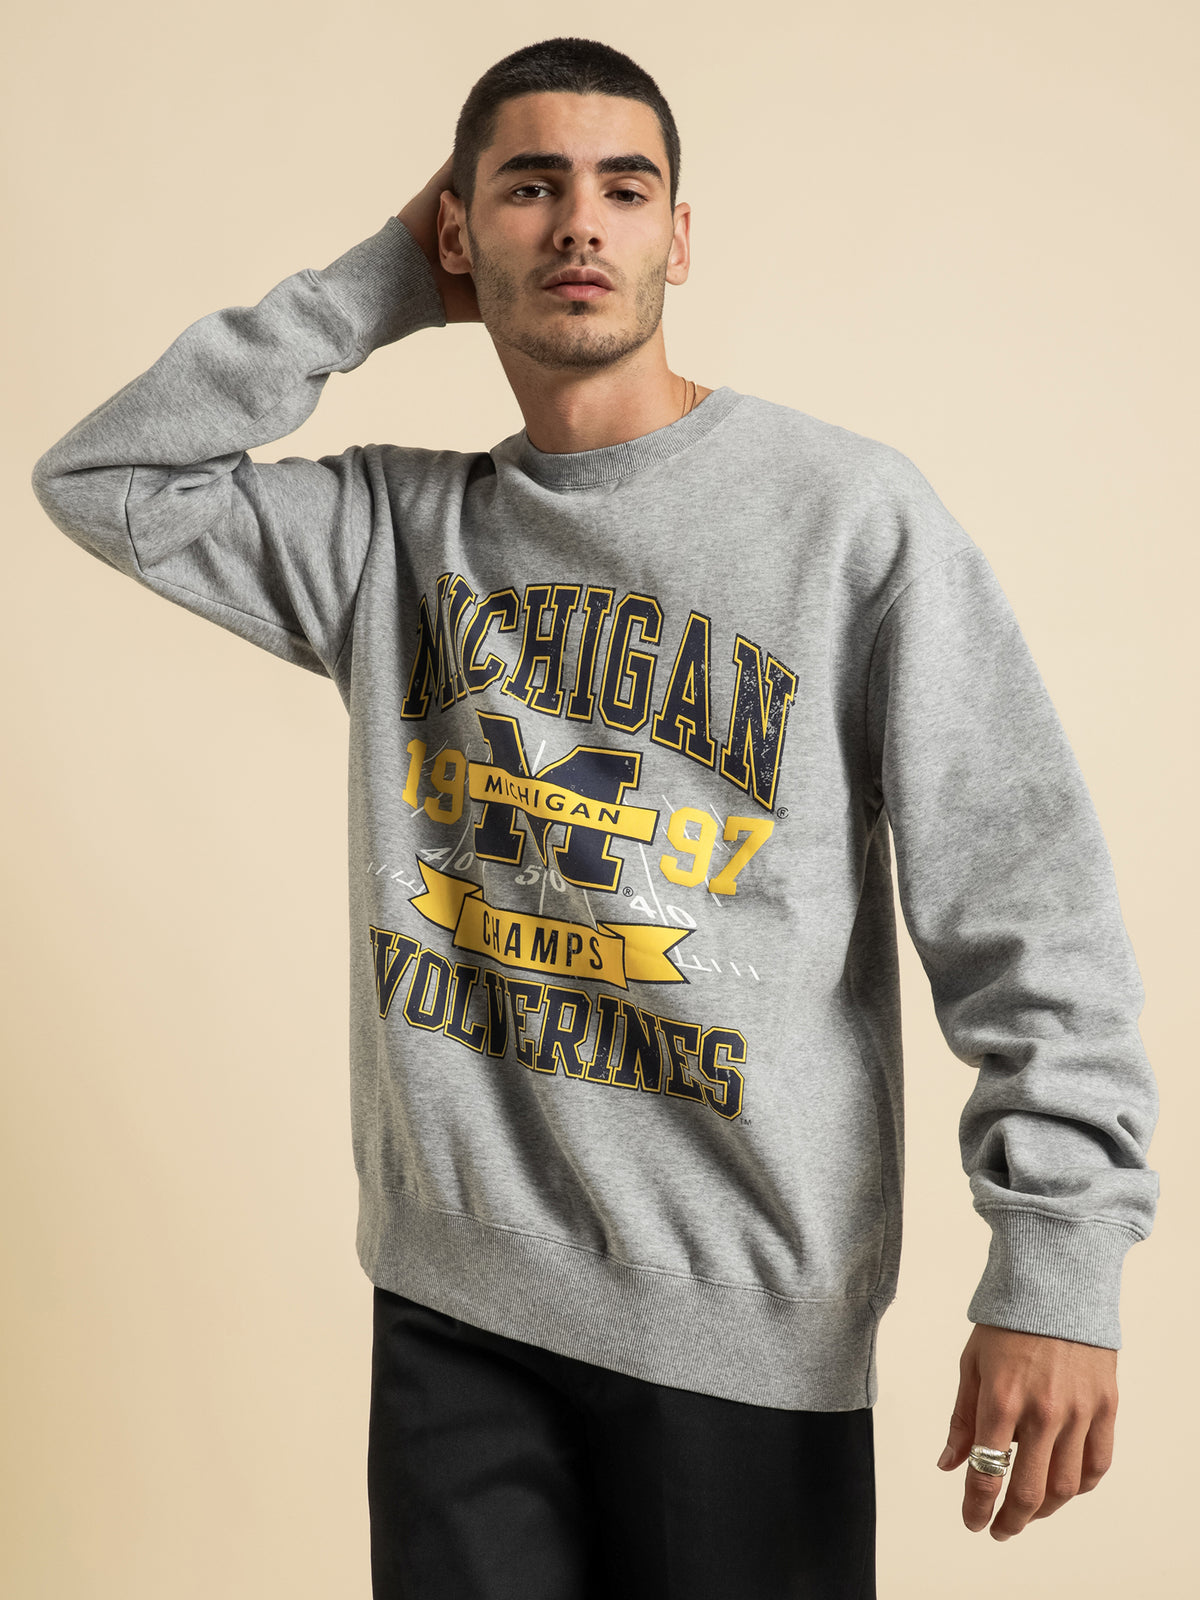 Vintage 90s Michigan Champs in Grey Marle